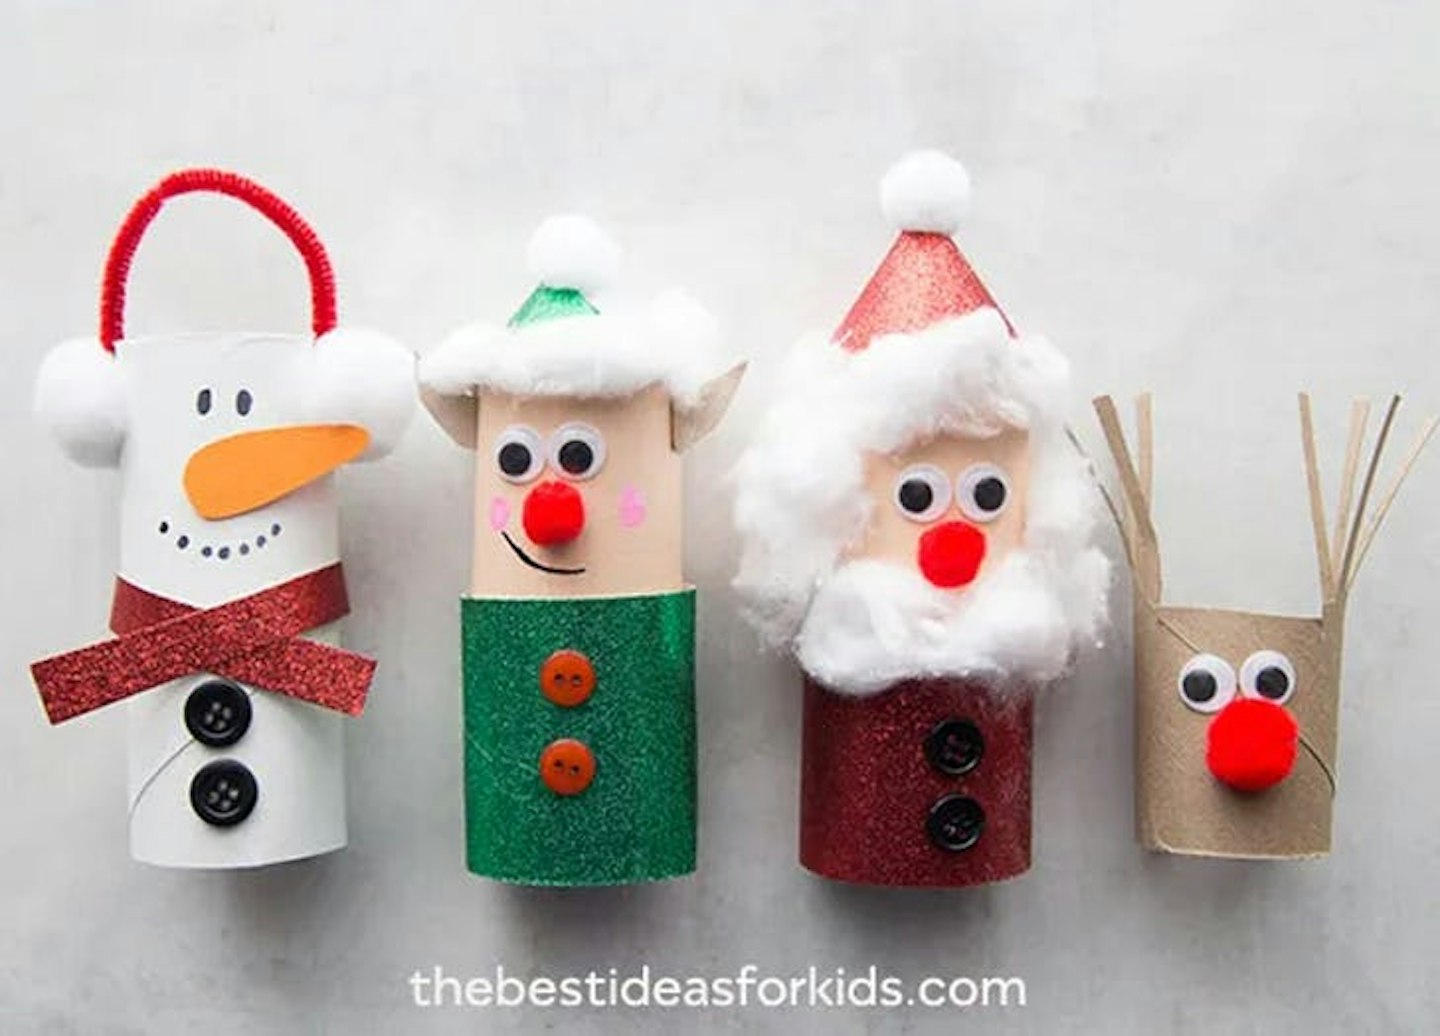 Christmas toilet paper crafts